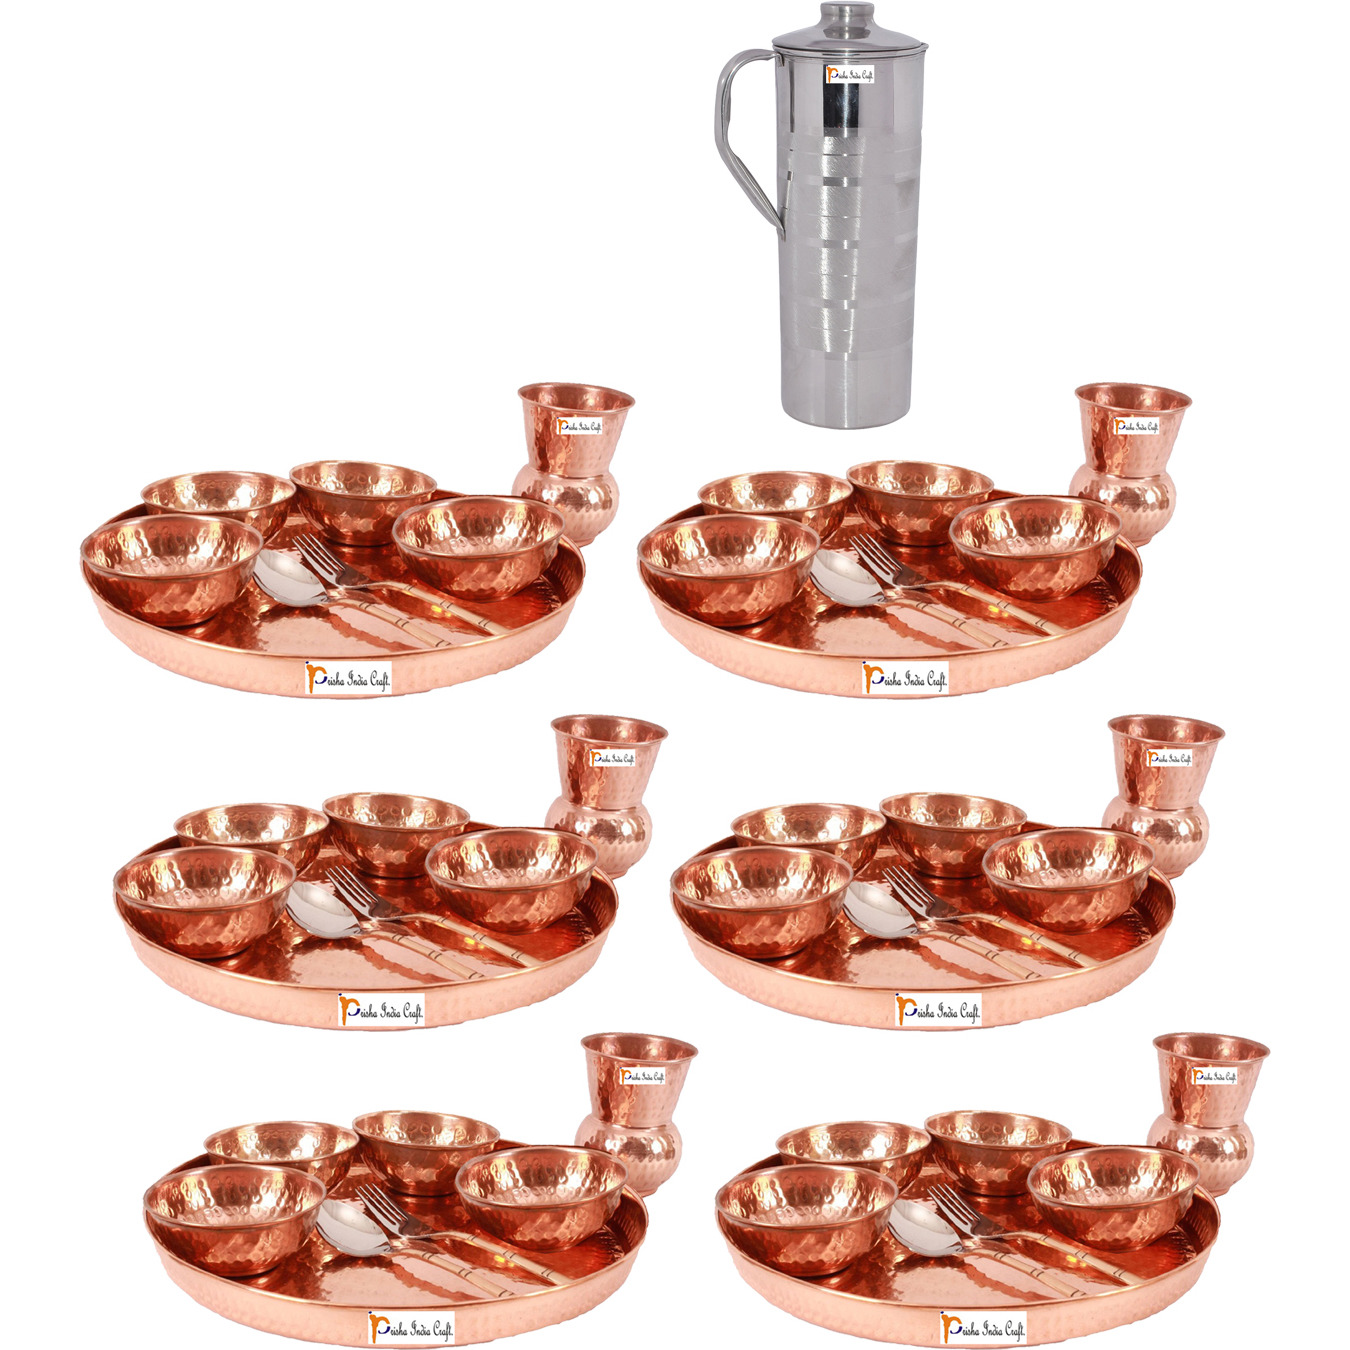 Prisha India Craft B. Set of 6 Dinnerware Traditional 100% Pure Copper Dinner Set of Thali Plate, Bowls, Glass and Spoon, Dia 12  With 1 Luxury Style Stainless Steel Copper Pitcher Jug - Christmas Gift